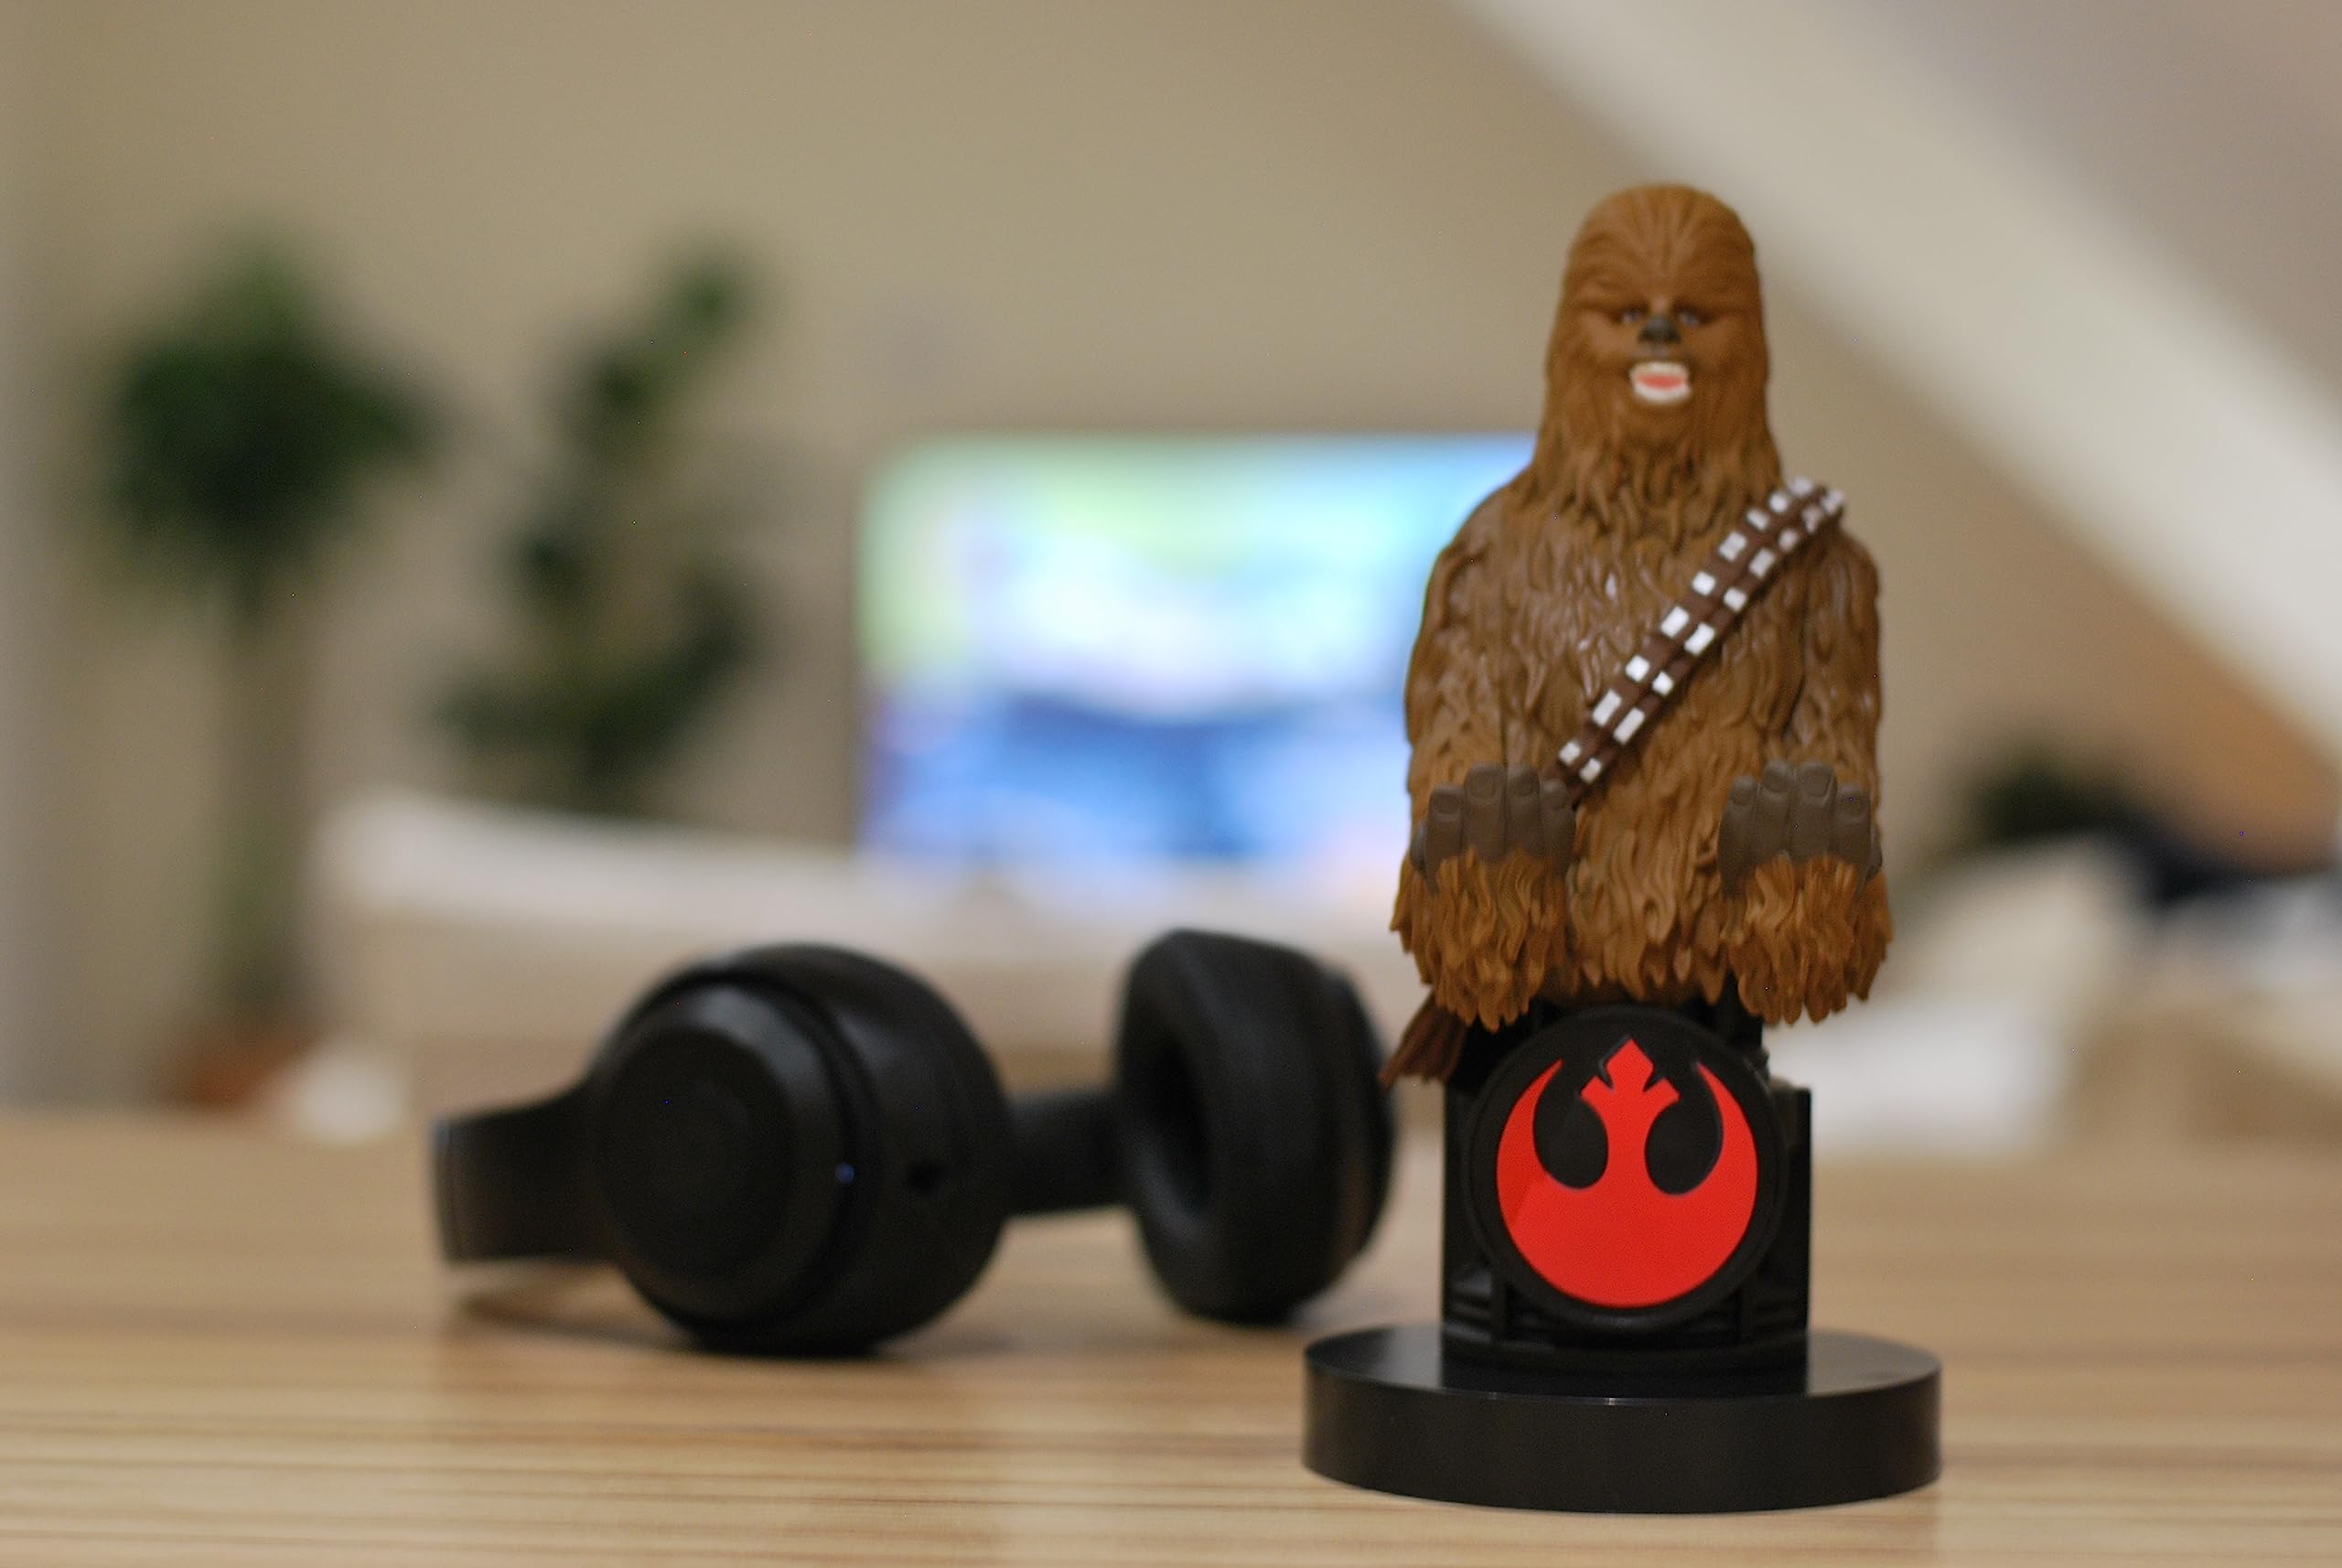 Exquisite Gaming Cable Guy: Phone/Controller Holder - Star Wars Chewbacca